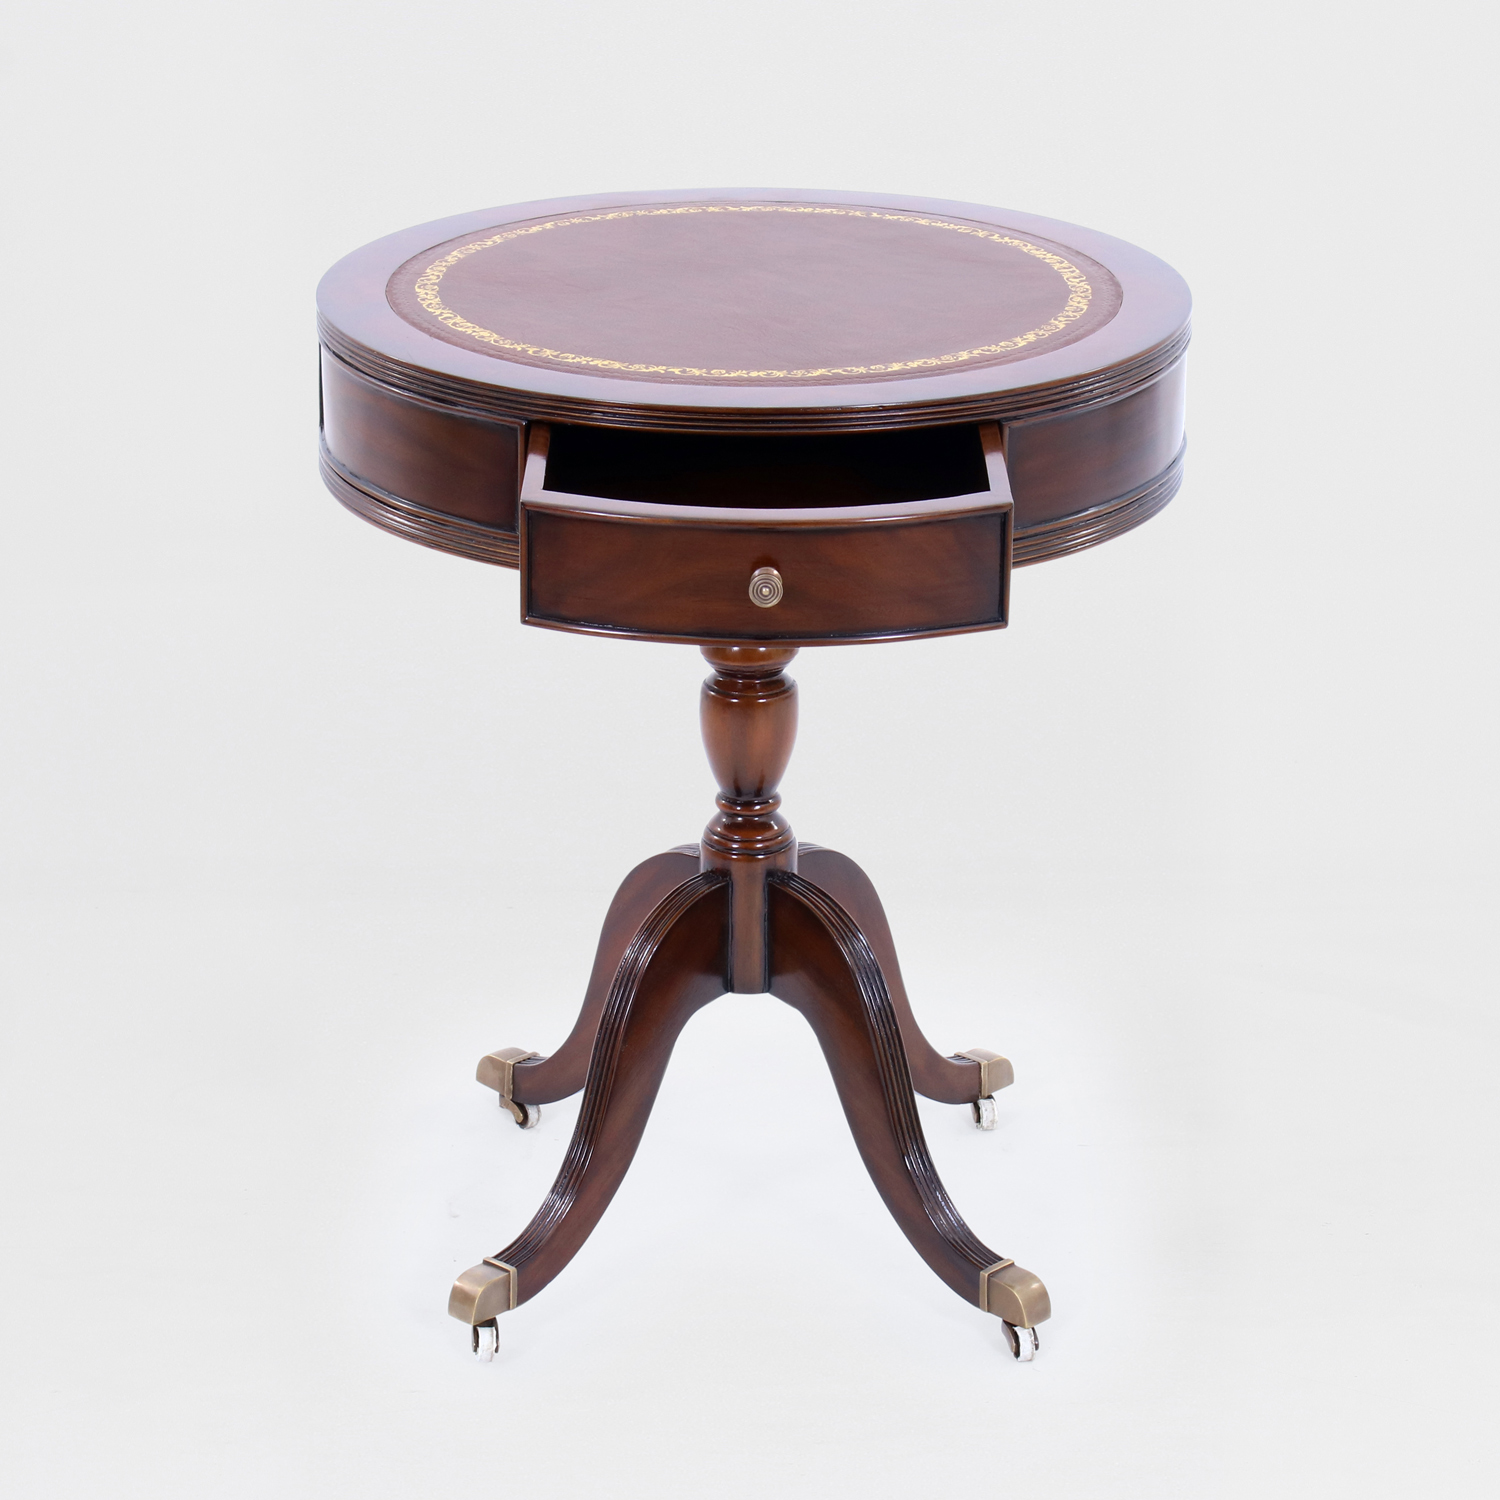 34870L---Drum-Table-Ron,-Leather-Top,-EM-+-ABRN-(2)